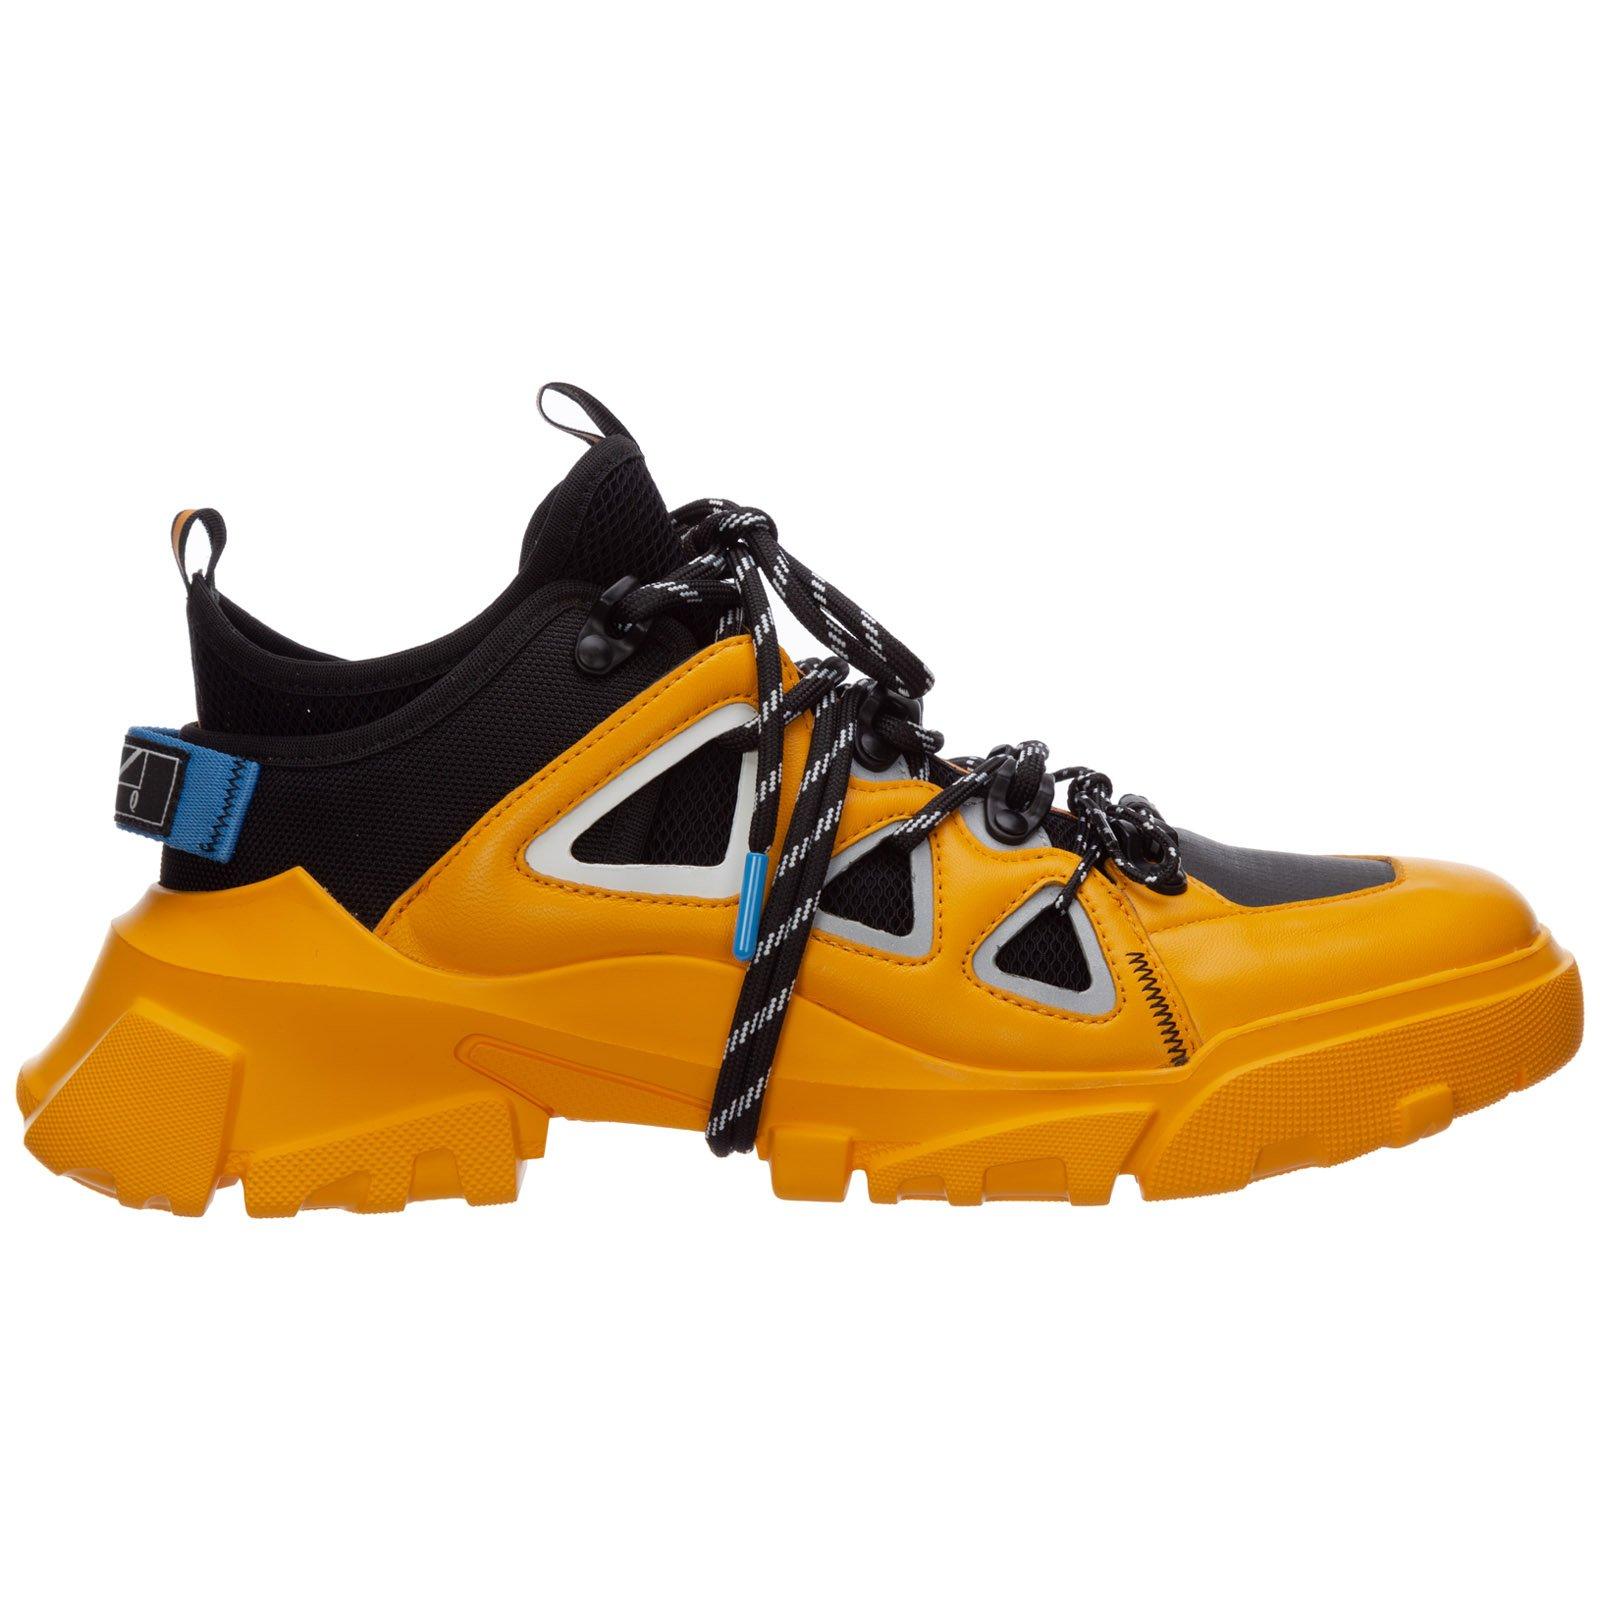 McQ Leather Orbyt Sneakers in Yellow for Men - Lyst